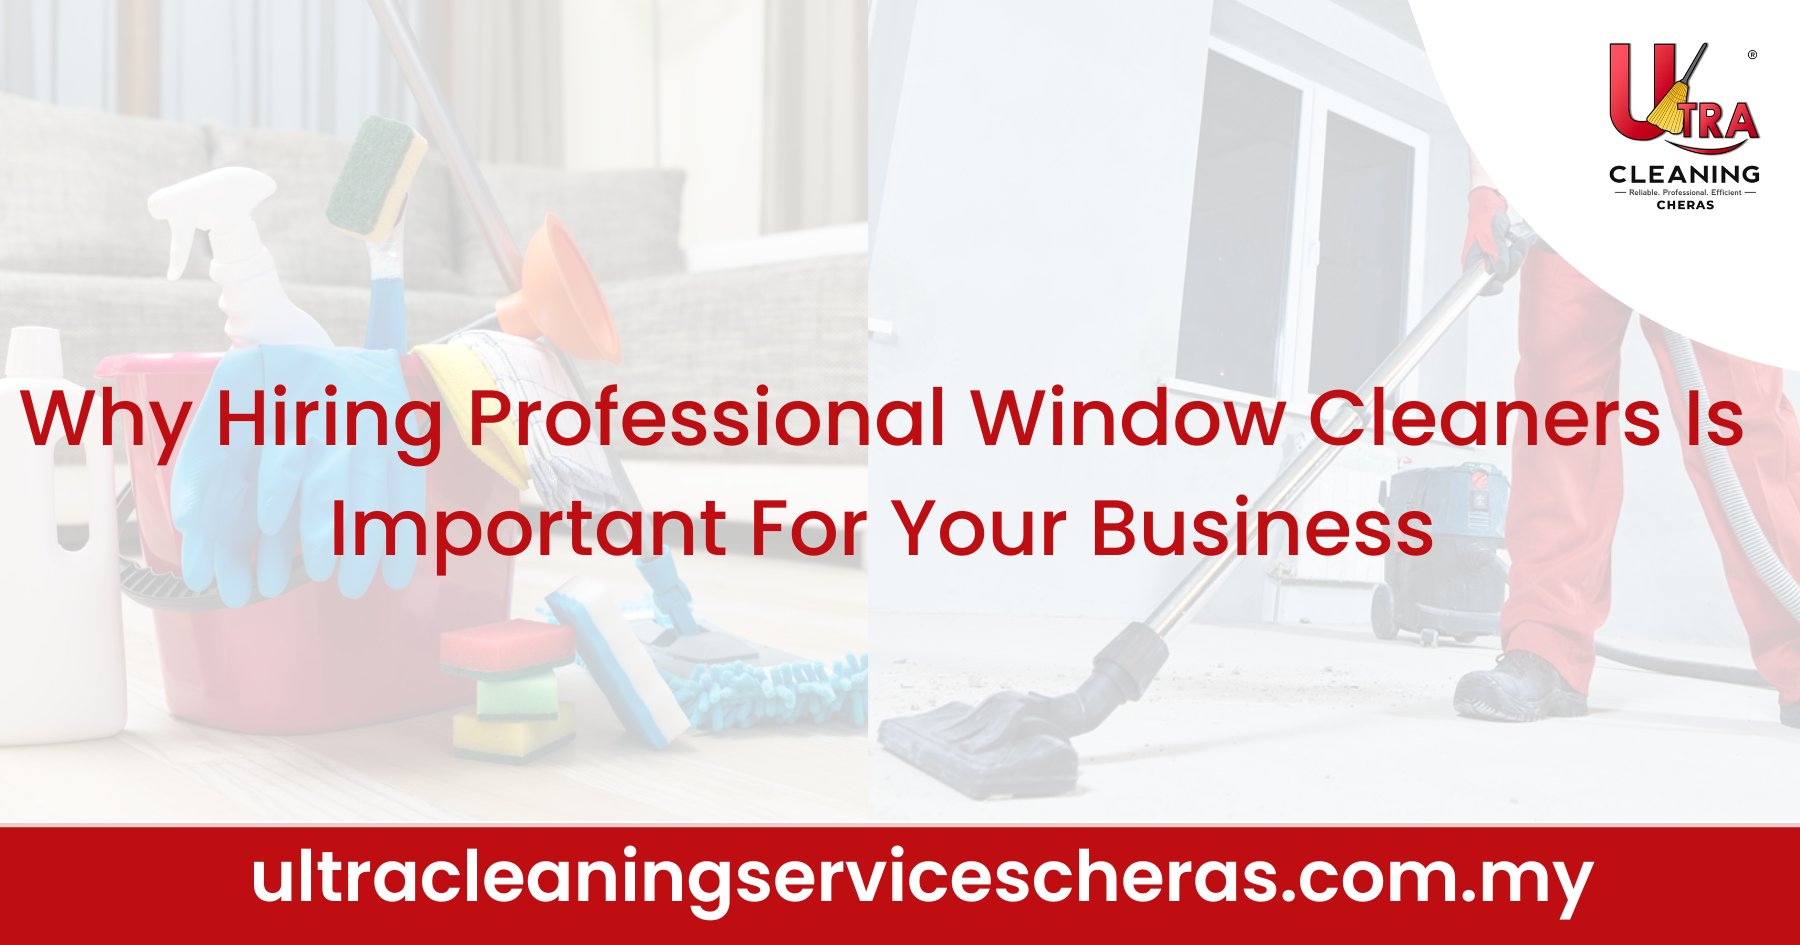 Why Hiring Professional Window Cleaners Is Important For Your Business